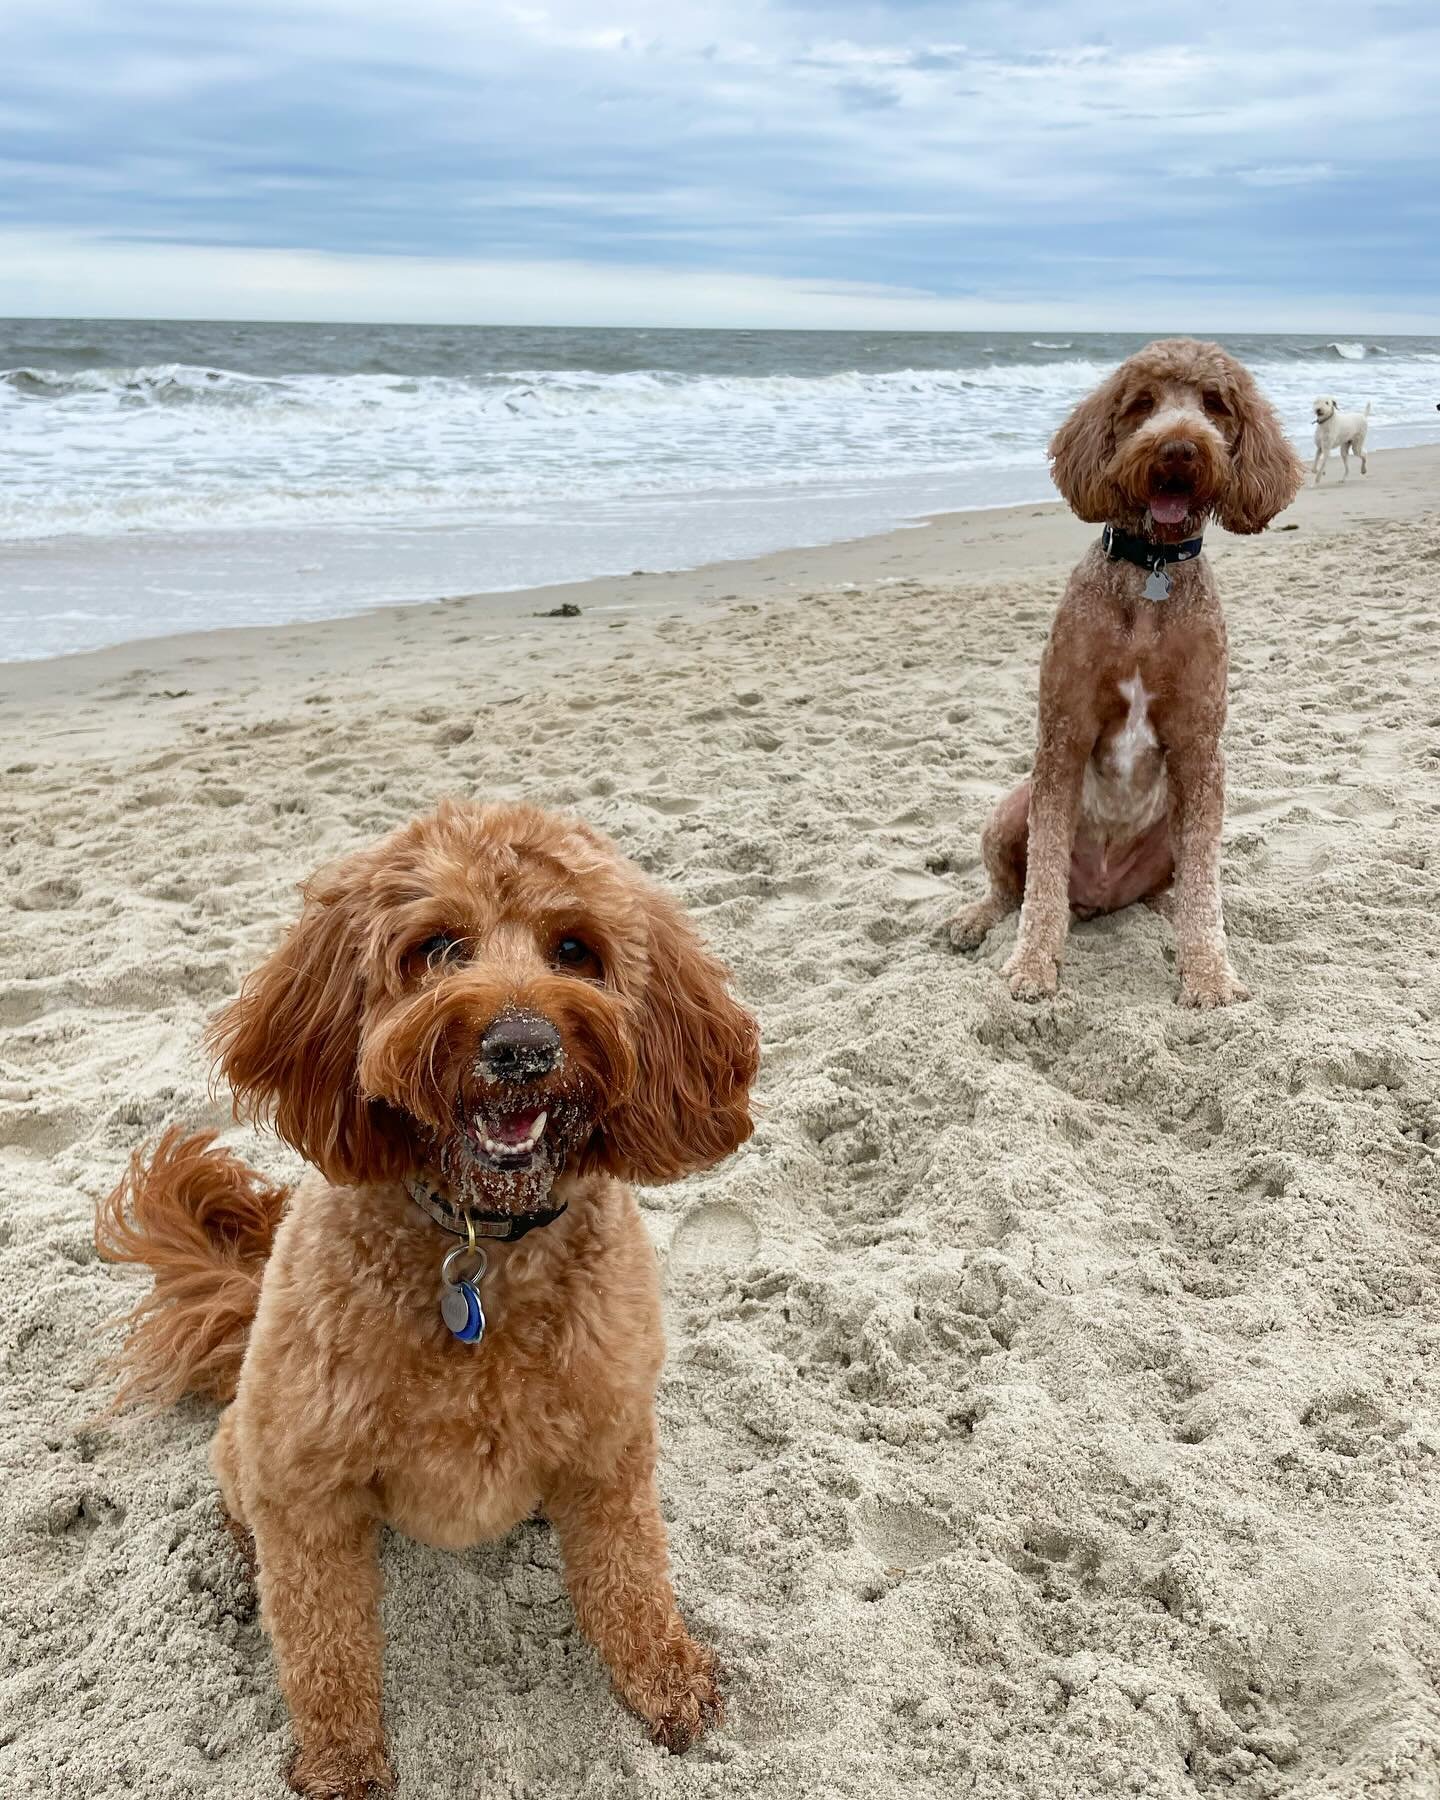 🏖️ + 🐶= weekend well spent at Doodles in Dewey
&bull;
Thank you to @pawsforpeople &amp; @doodlesindeweyfundraiser for such a wonderful weekend. We can&rsquo;t wait for next year! 
&bull;
&bull;
#pawsforpeople #doodlesindewey #pioneerpups #pioneerpu